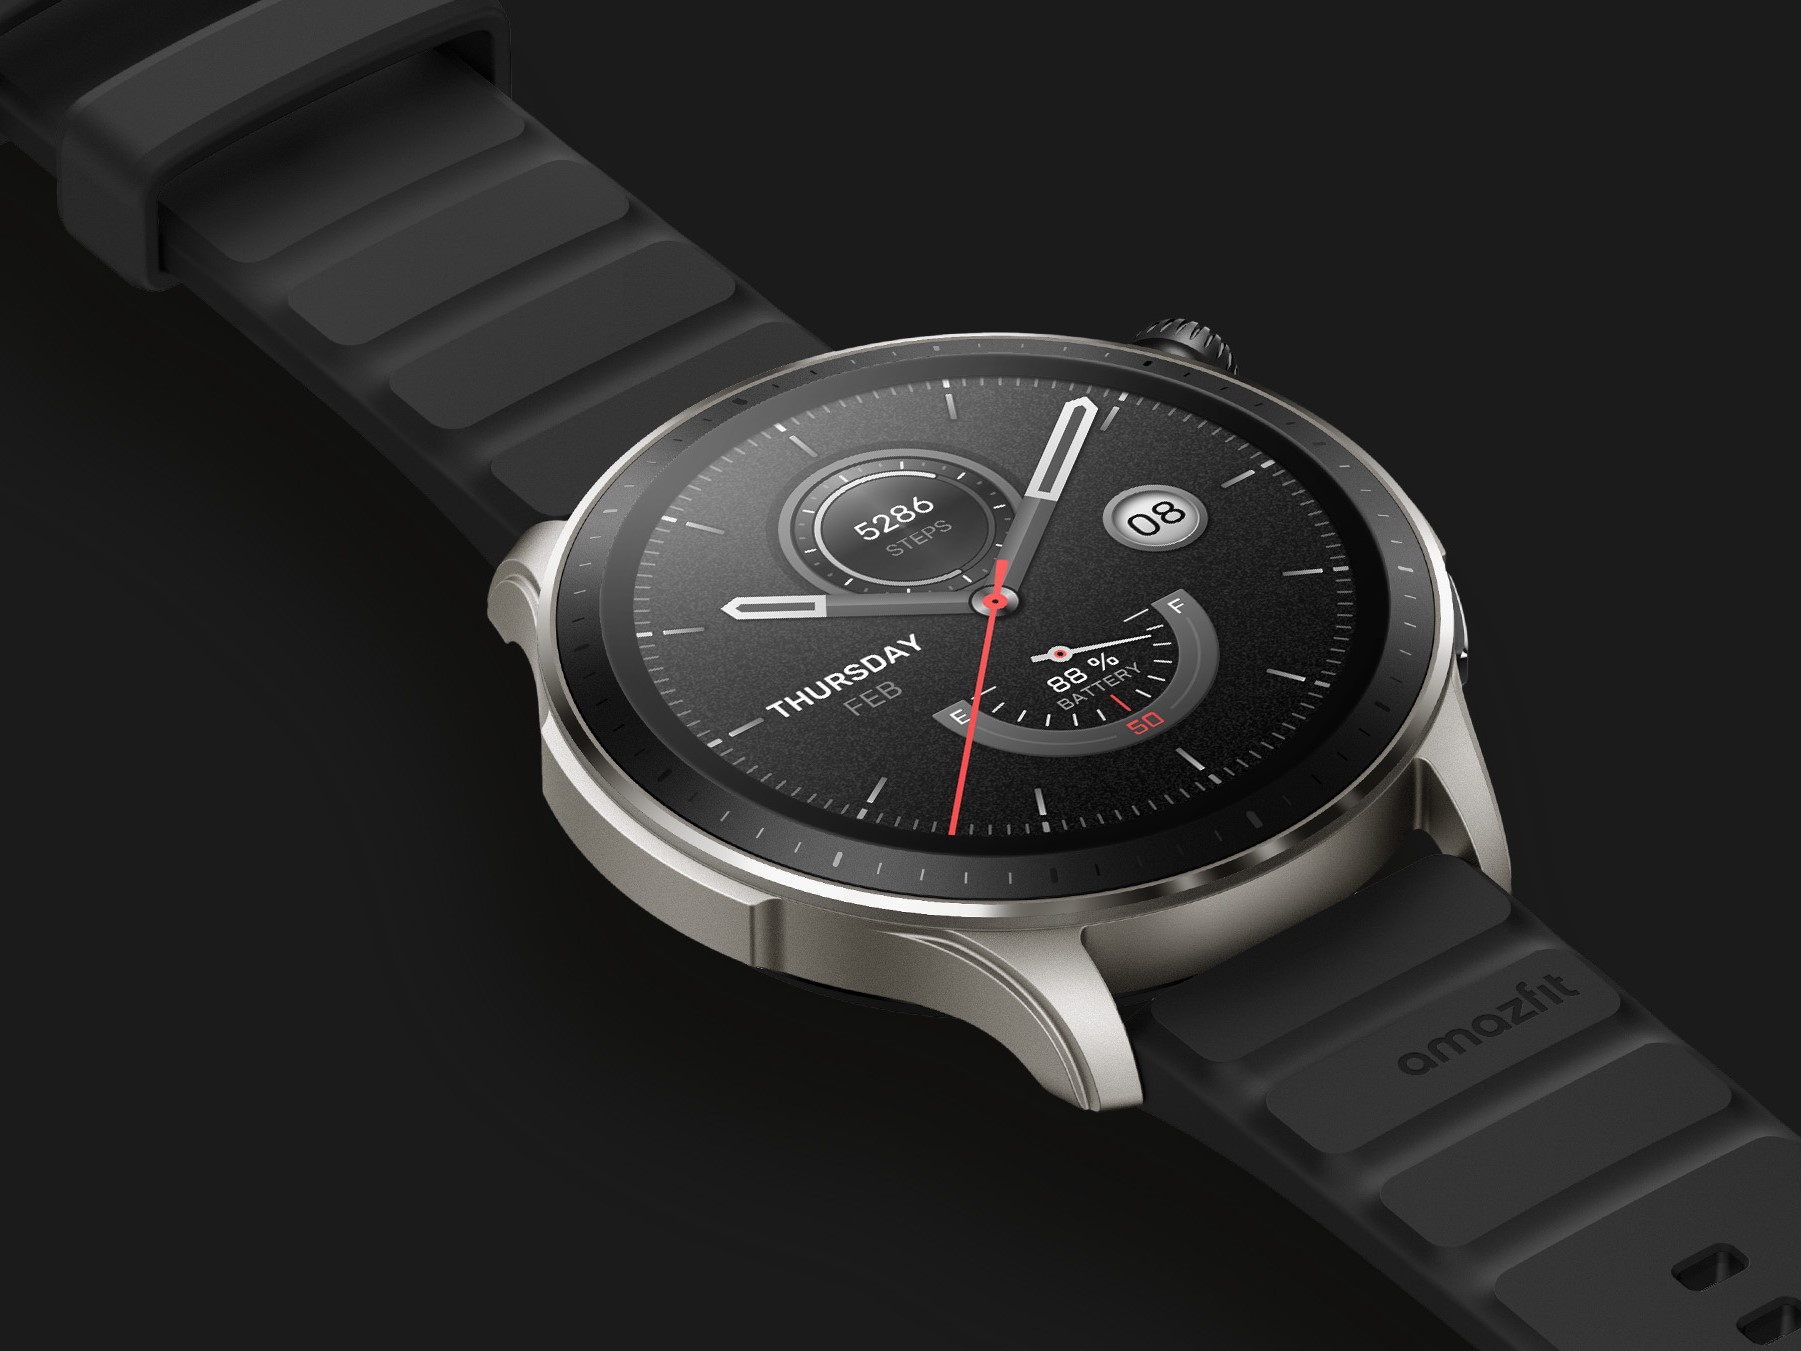 Amazfit rolls out ZeppOS 3.0 to GTR 4 smartwatch in new update